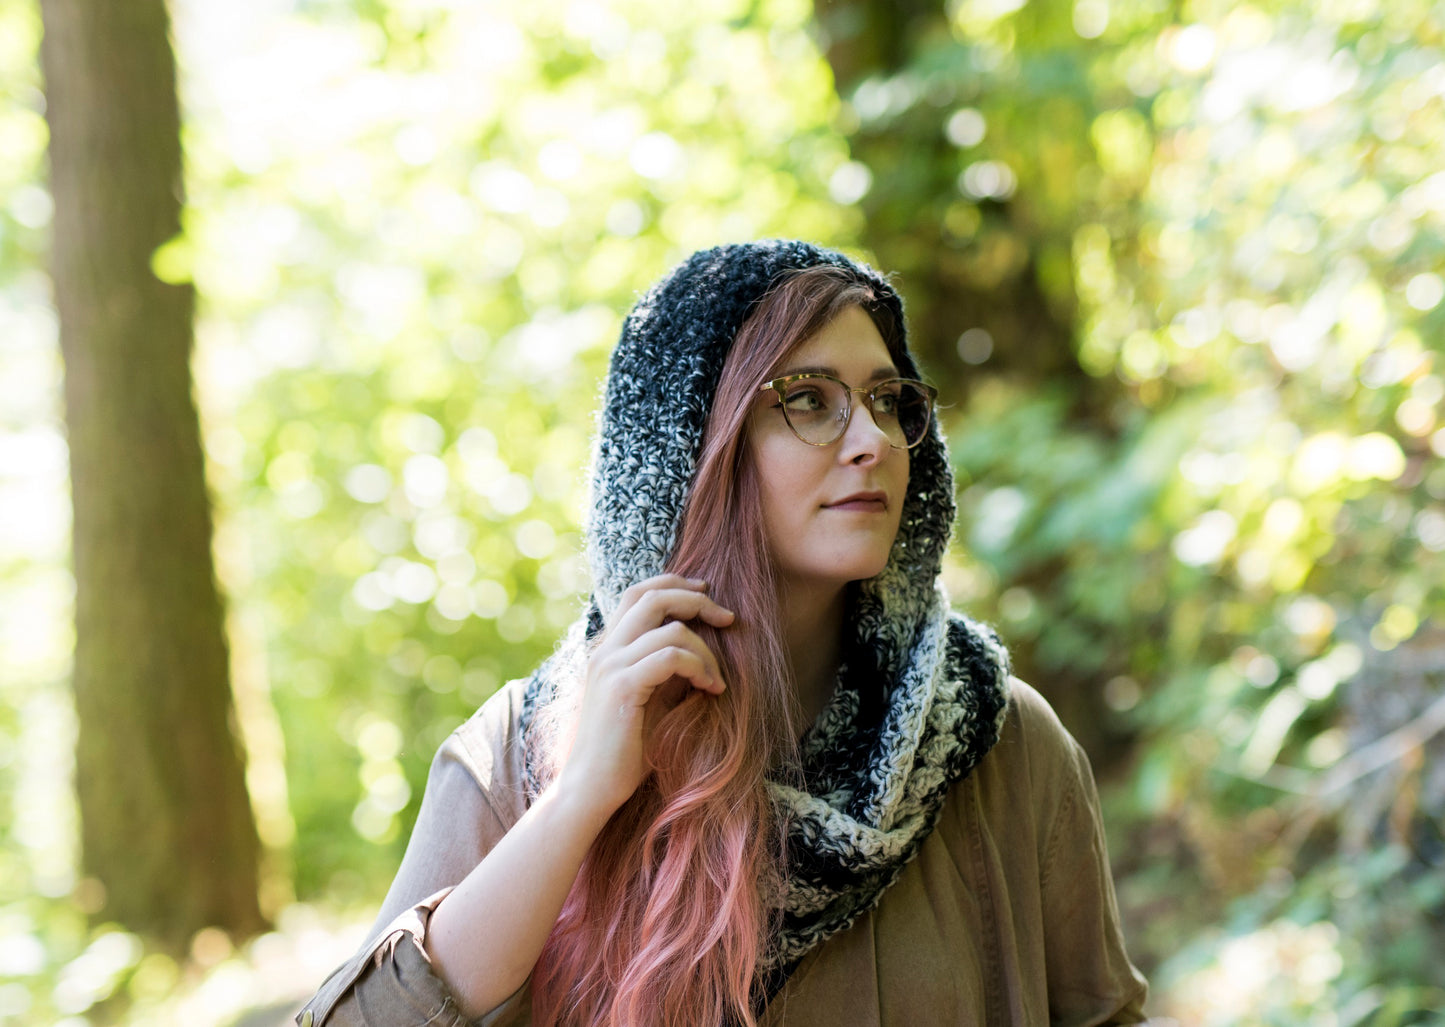 Crochet Pattern: The Magpie Hooded Scarf